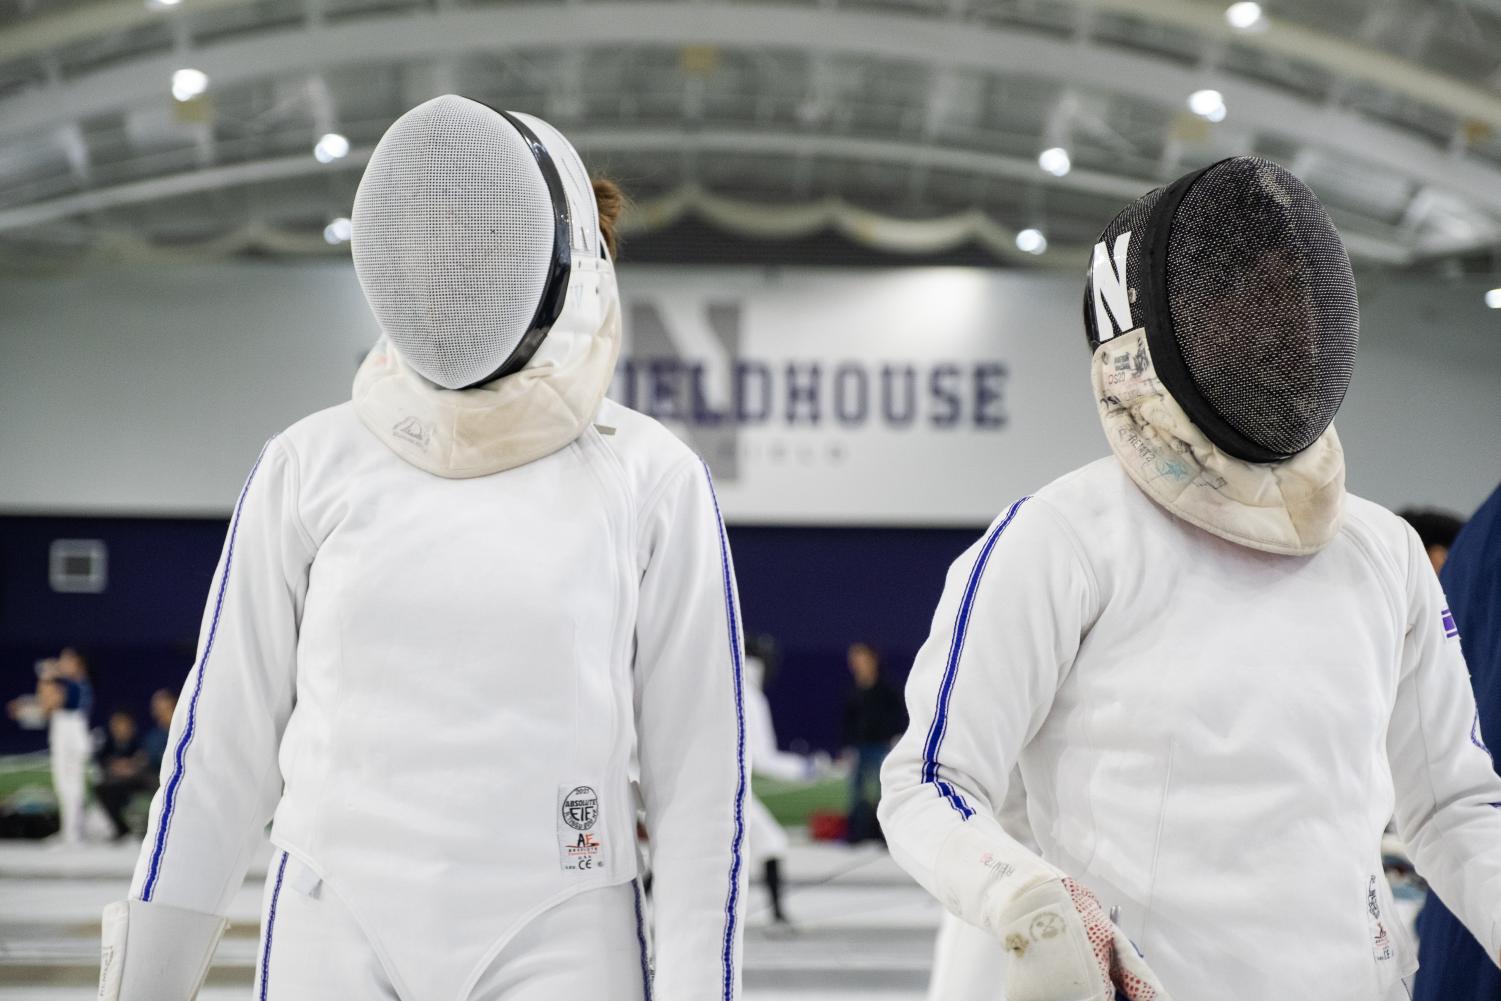 Two fencers wearing masks stand side by side.